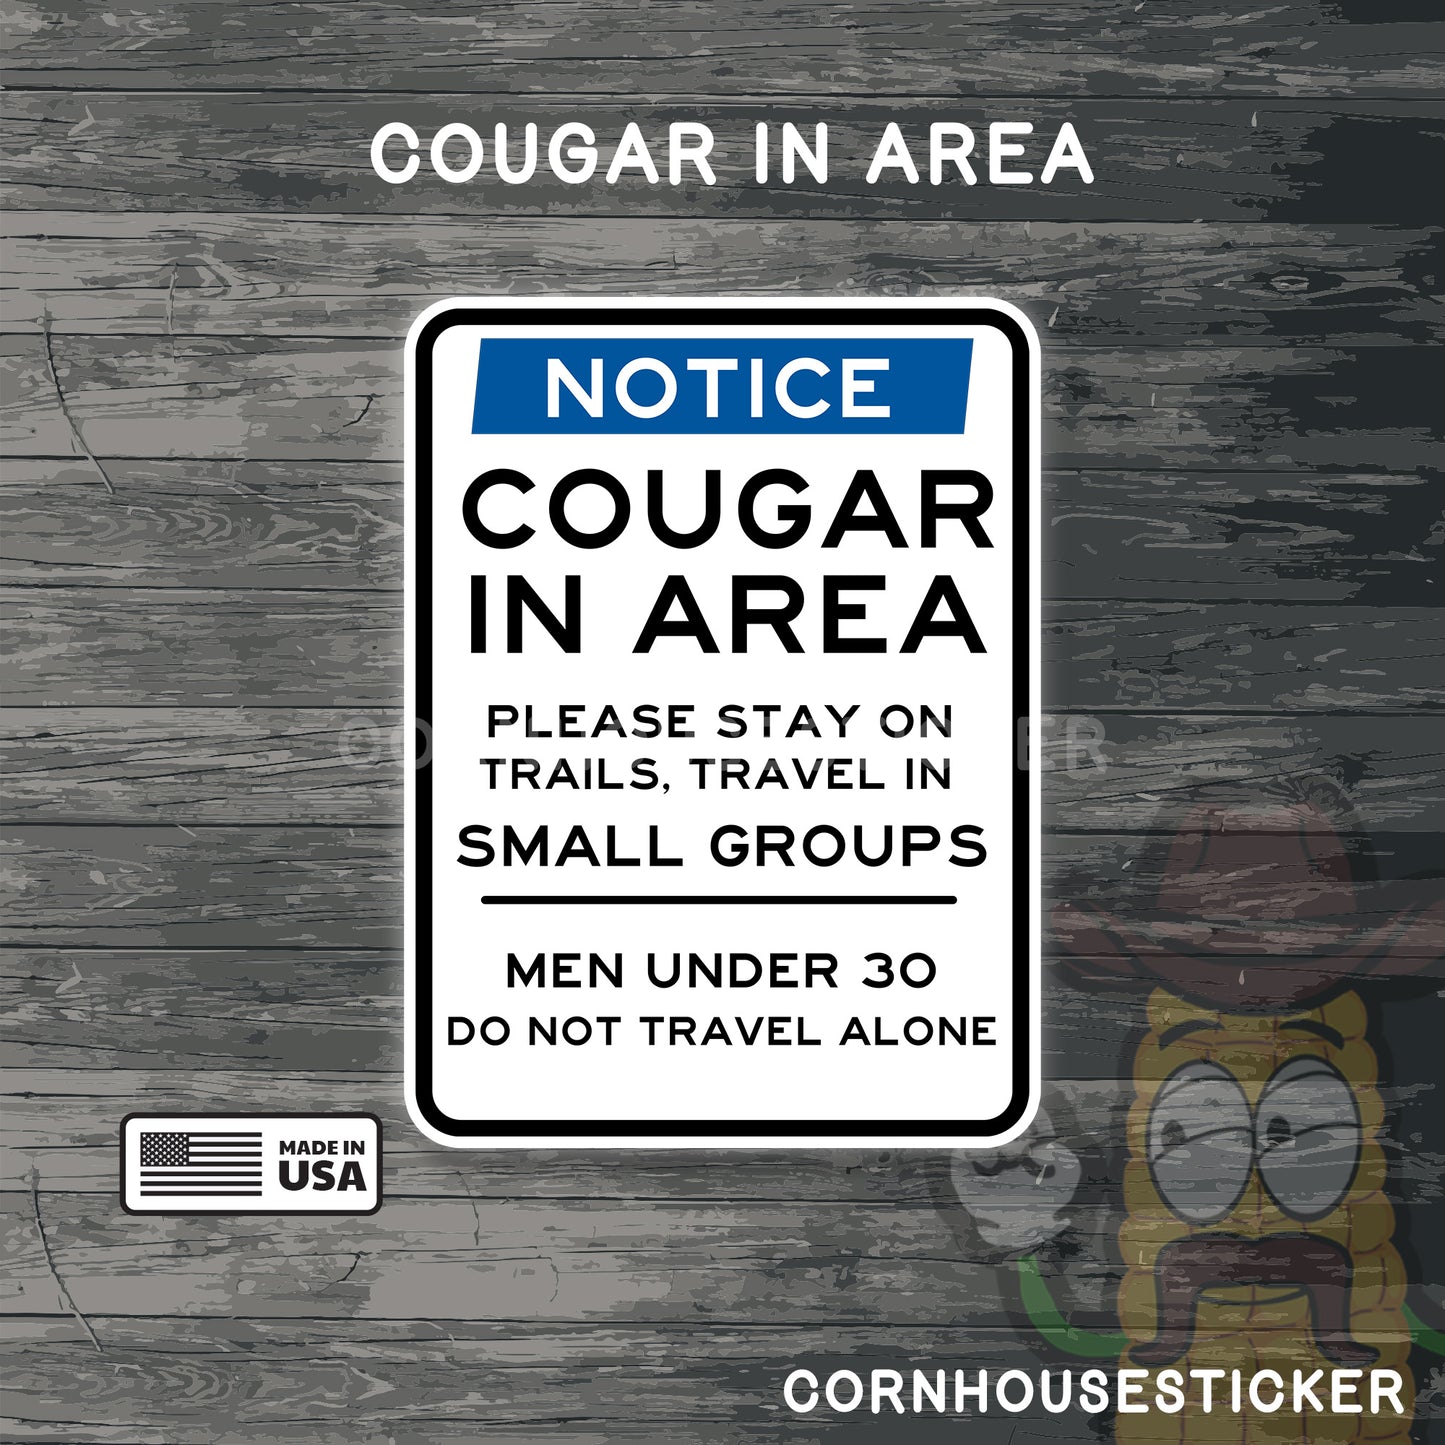 Cougar in area